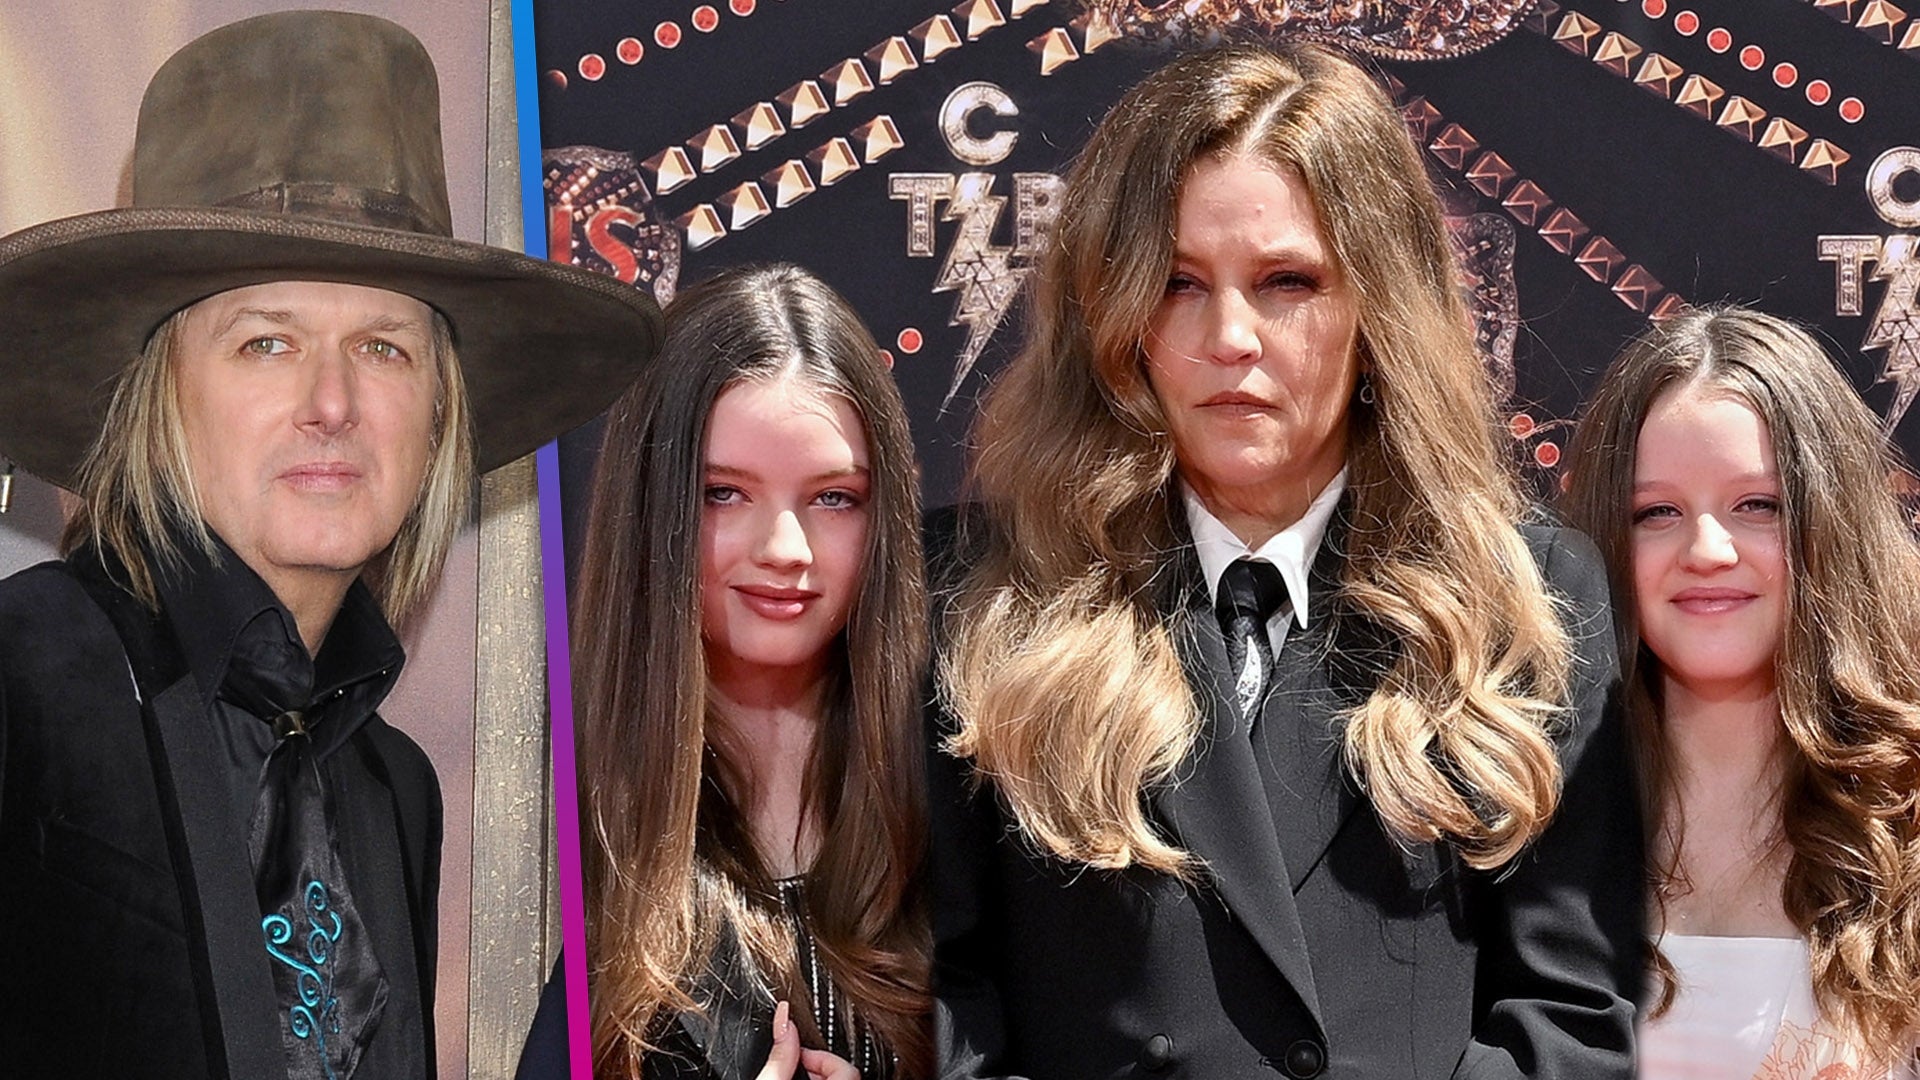 Lisa Marie Presley's Ex Michael Lockwood Says Their Daughters Will Carry on Family Legacy